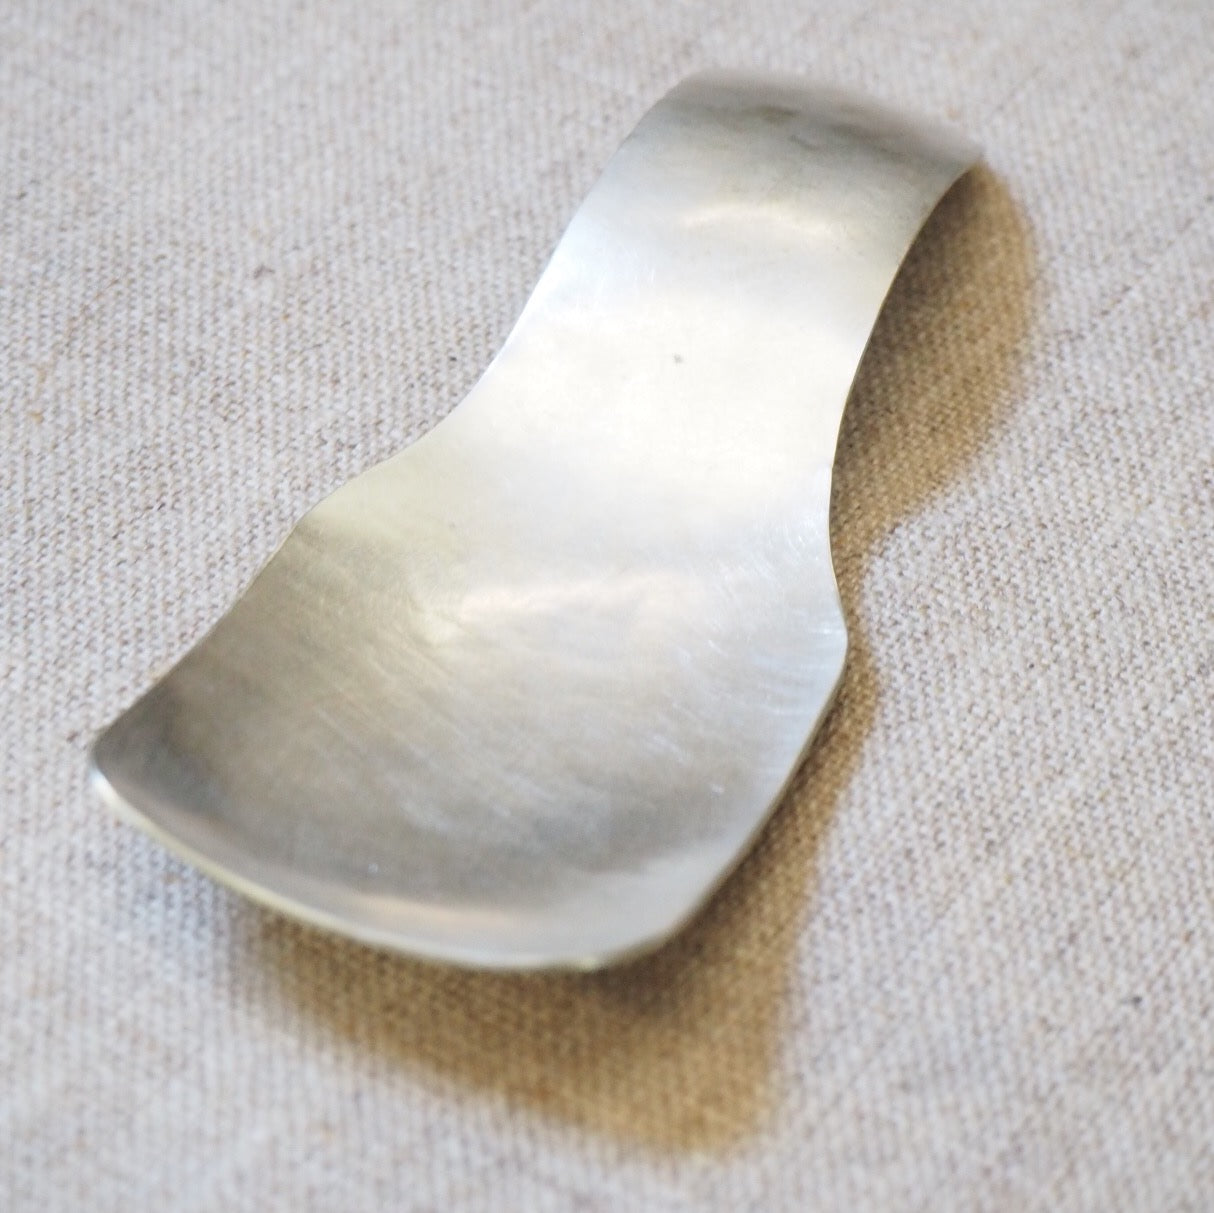 PLATED - square hammered silverplate spoon MMSS